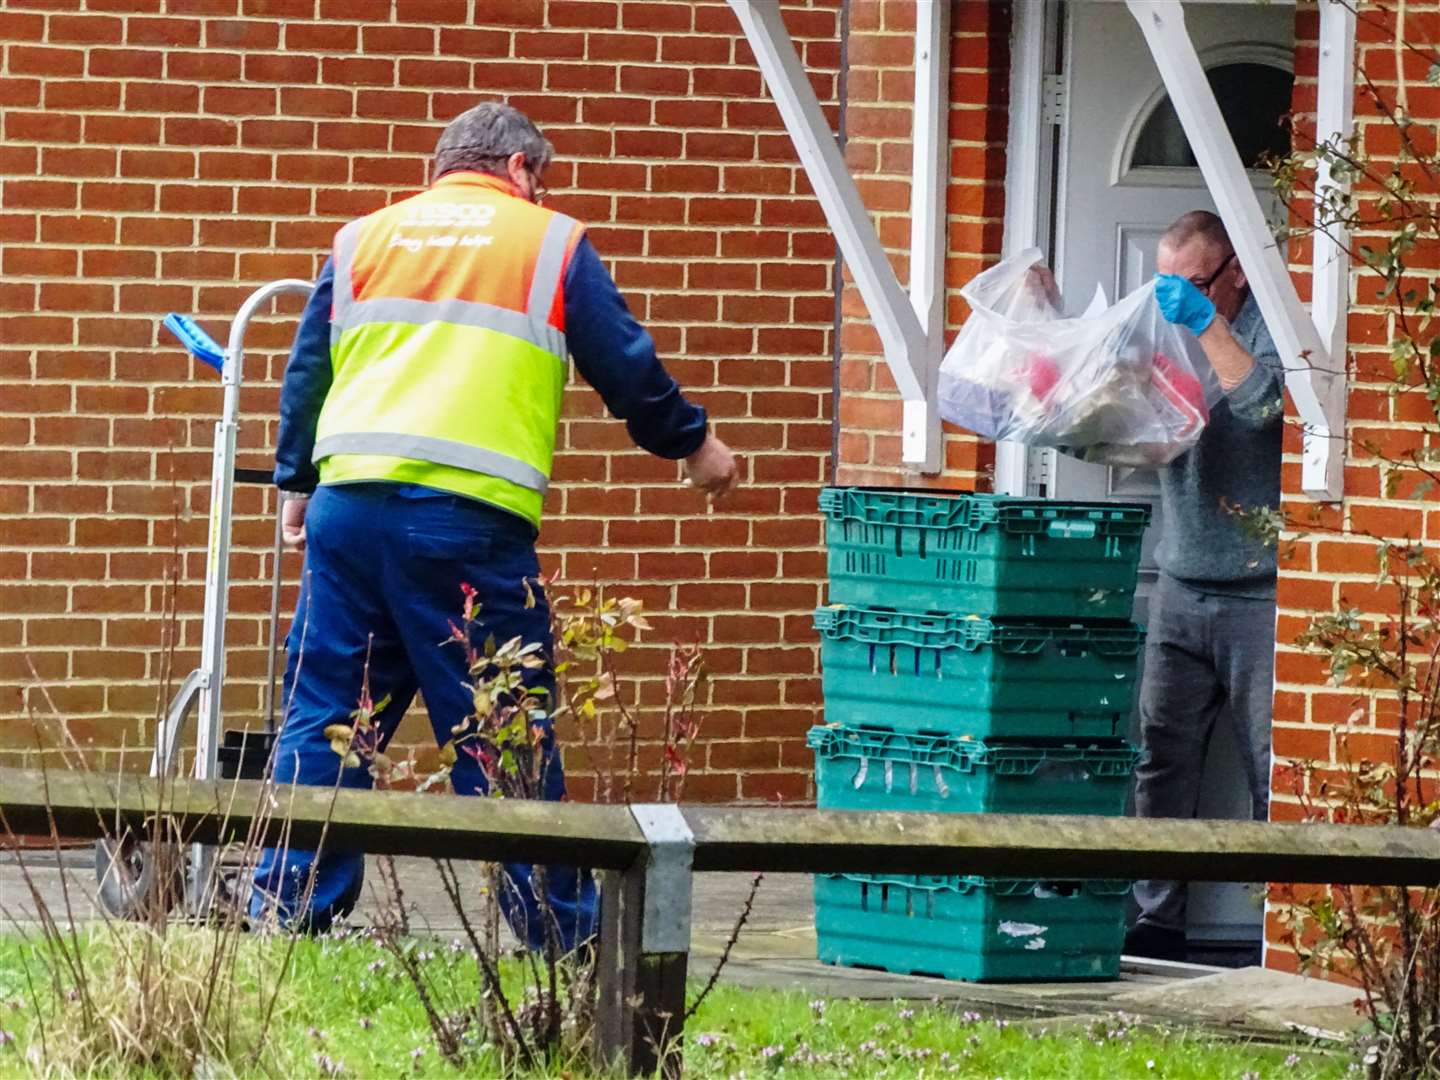 Home shopping deliveries became a part of daily life for a lot more people. Pic: Lesley Sears